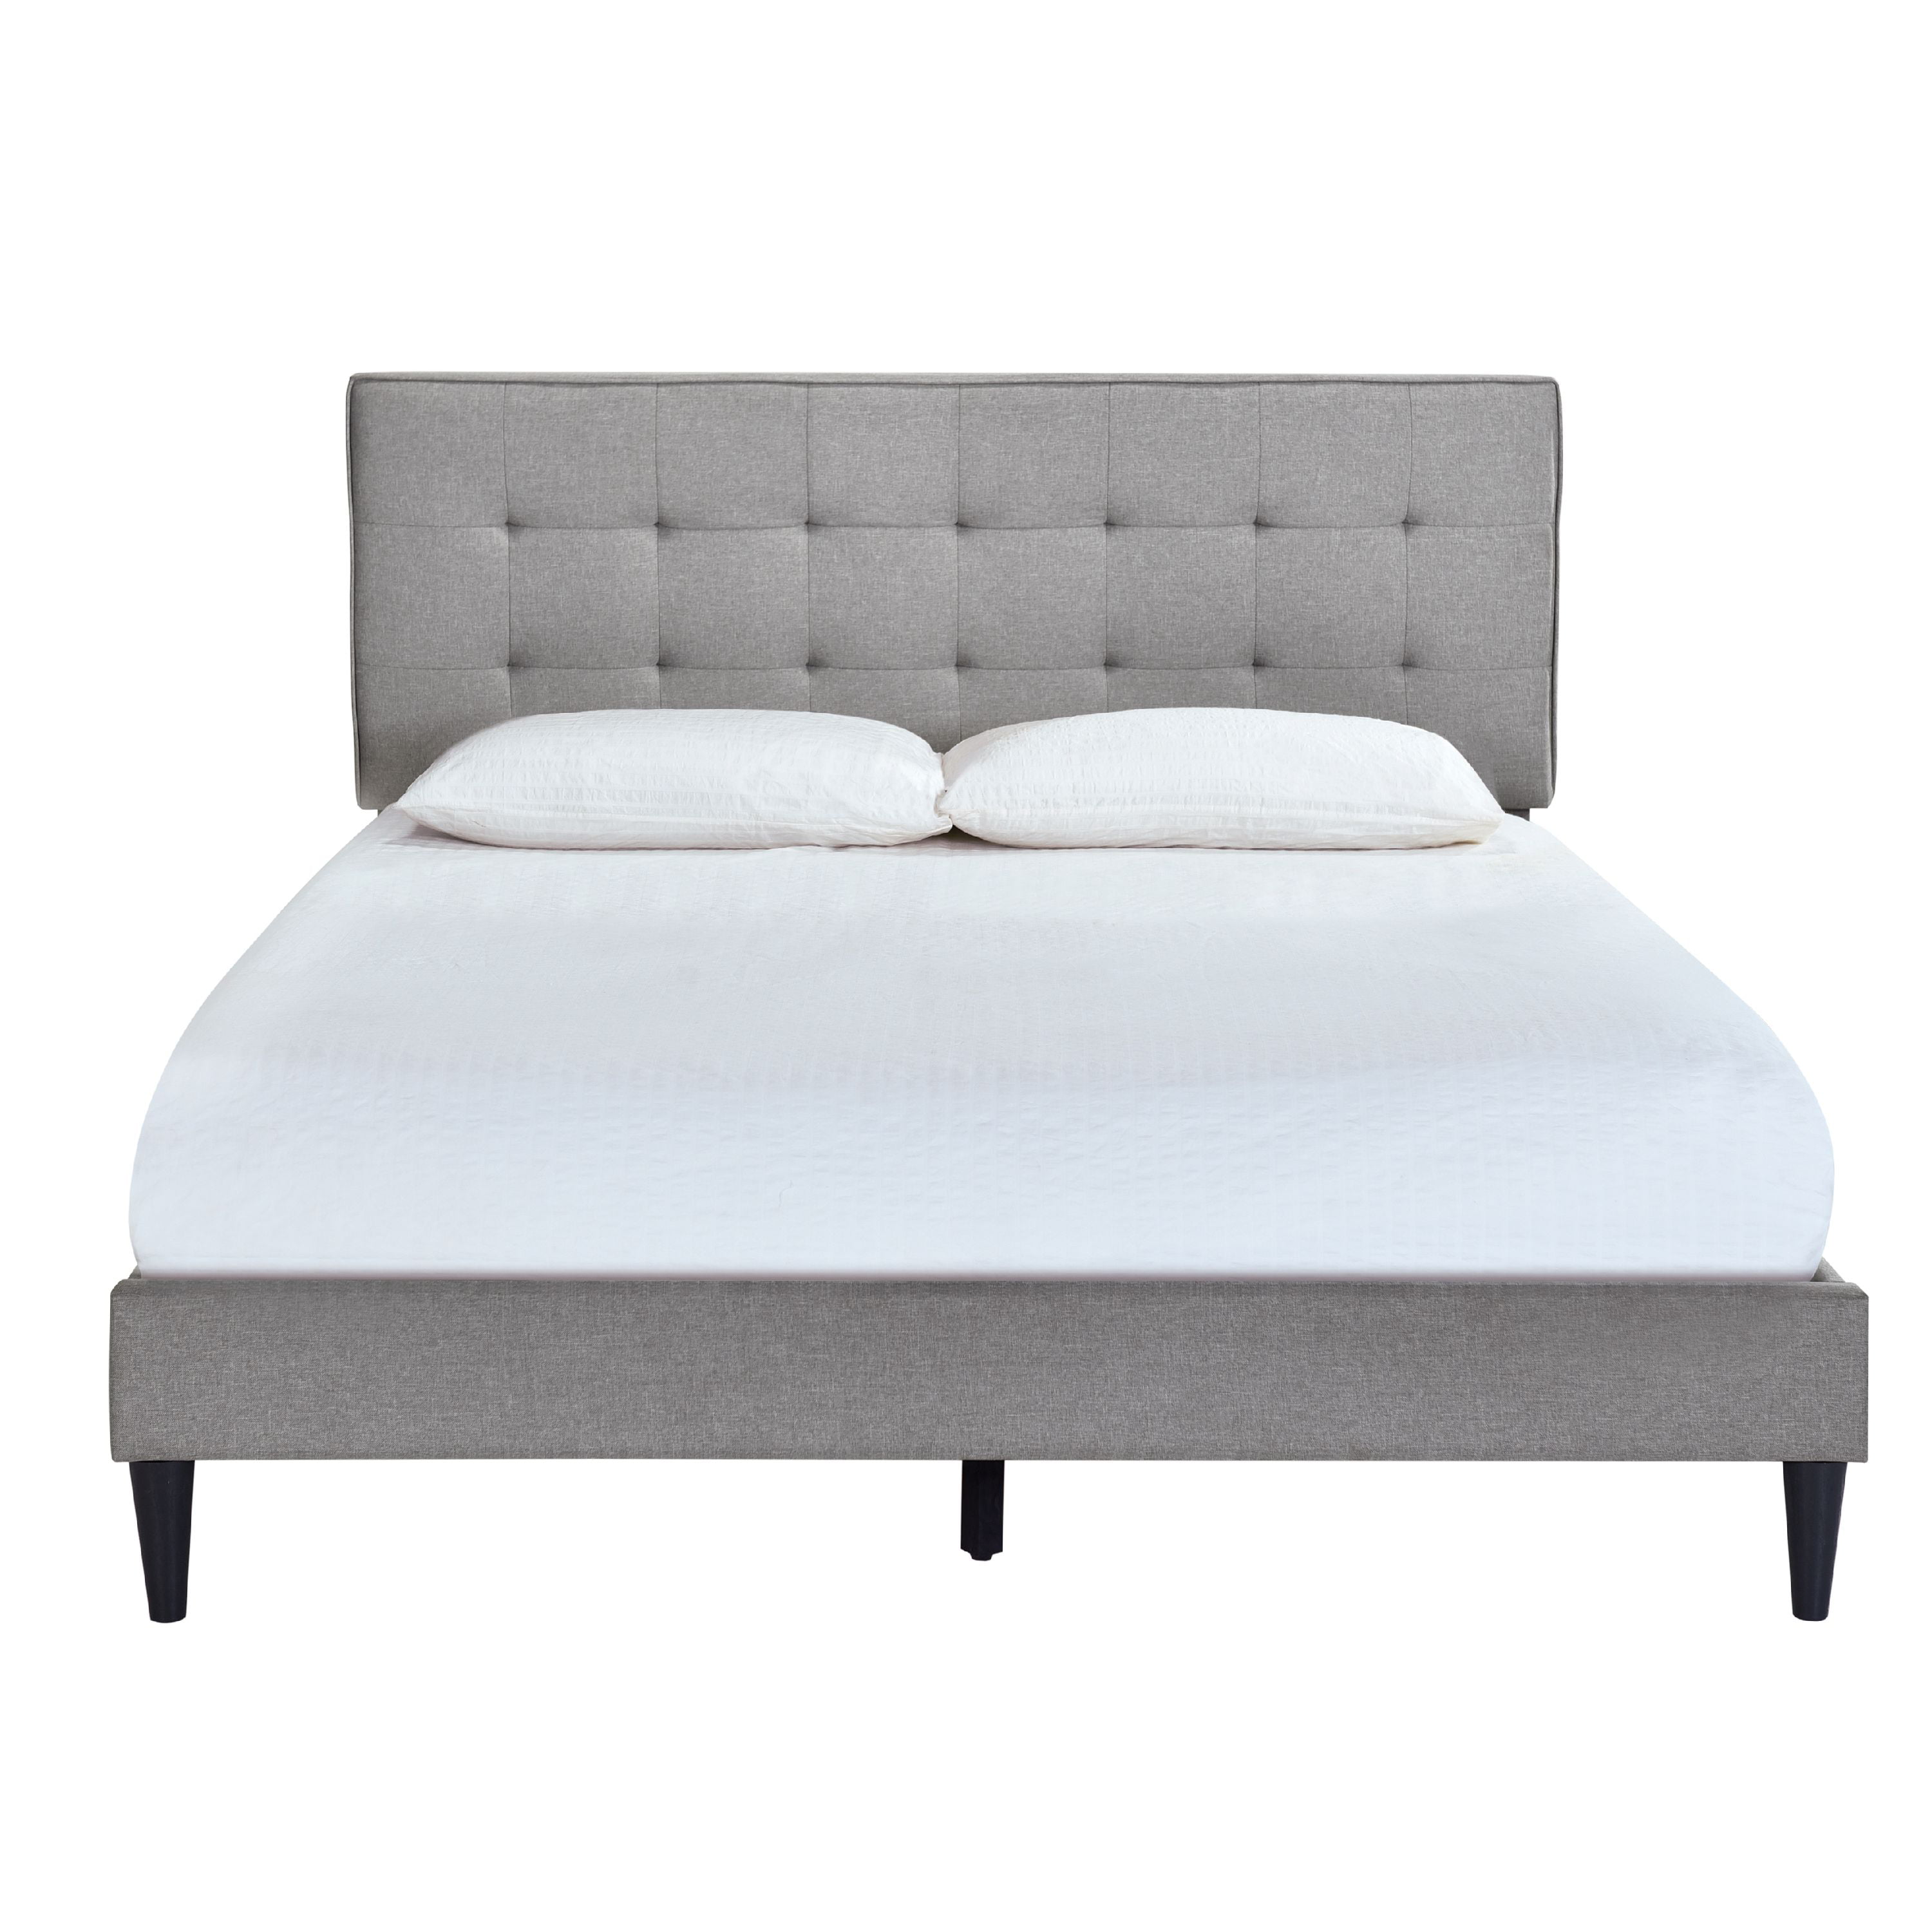 Gray King Queen Size Wood Platform Bed Frame with Tufted Headboard Upholstered 